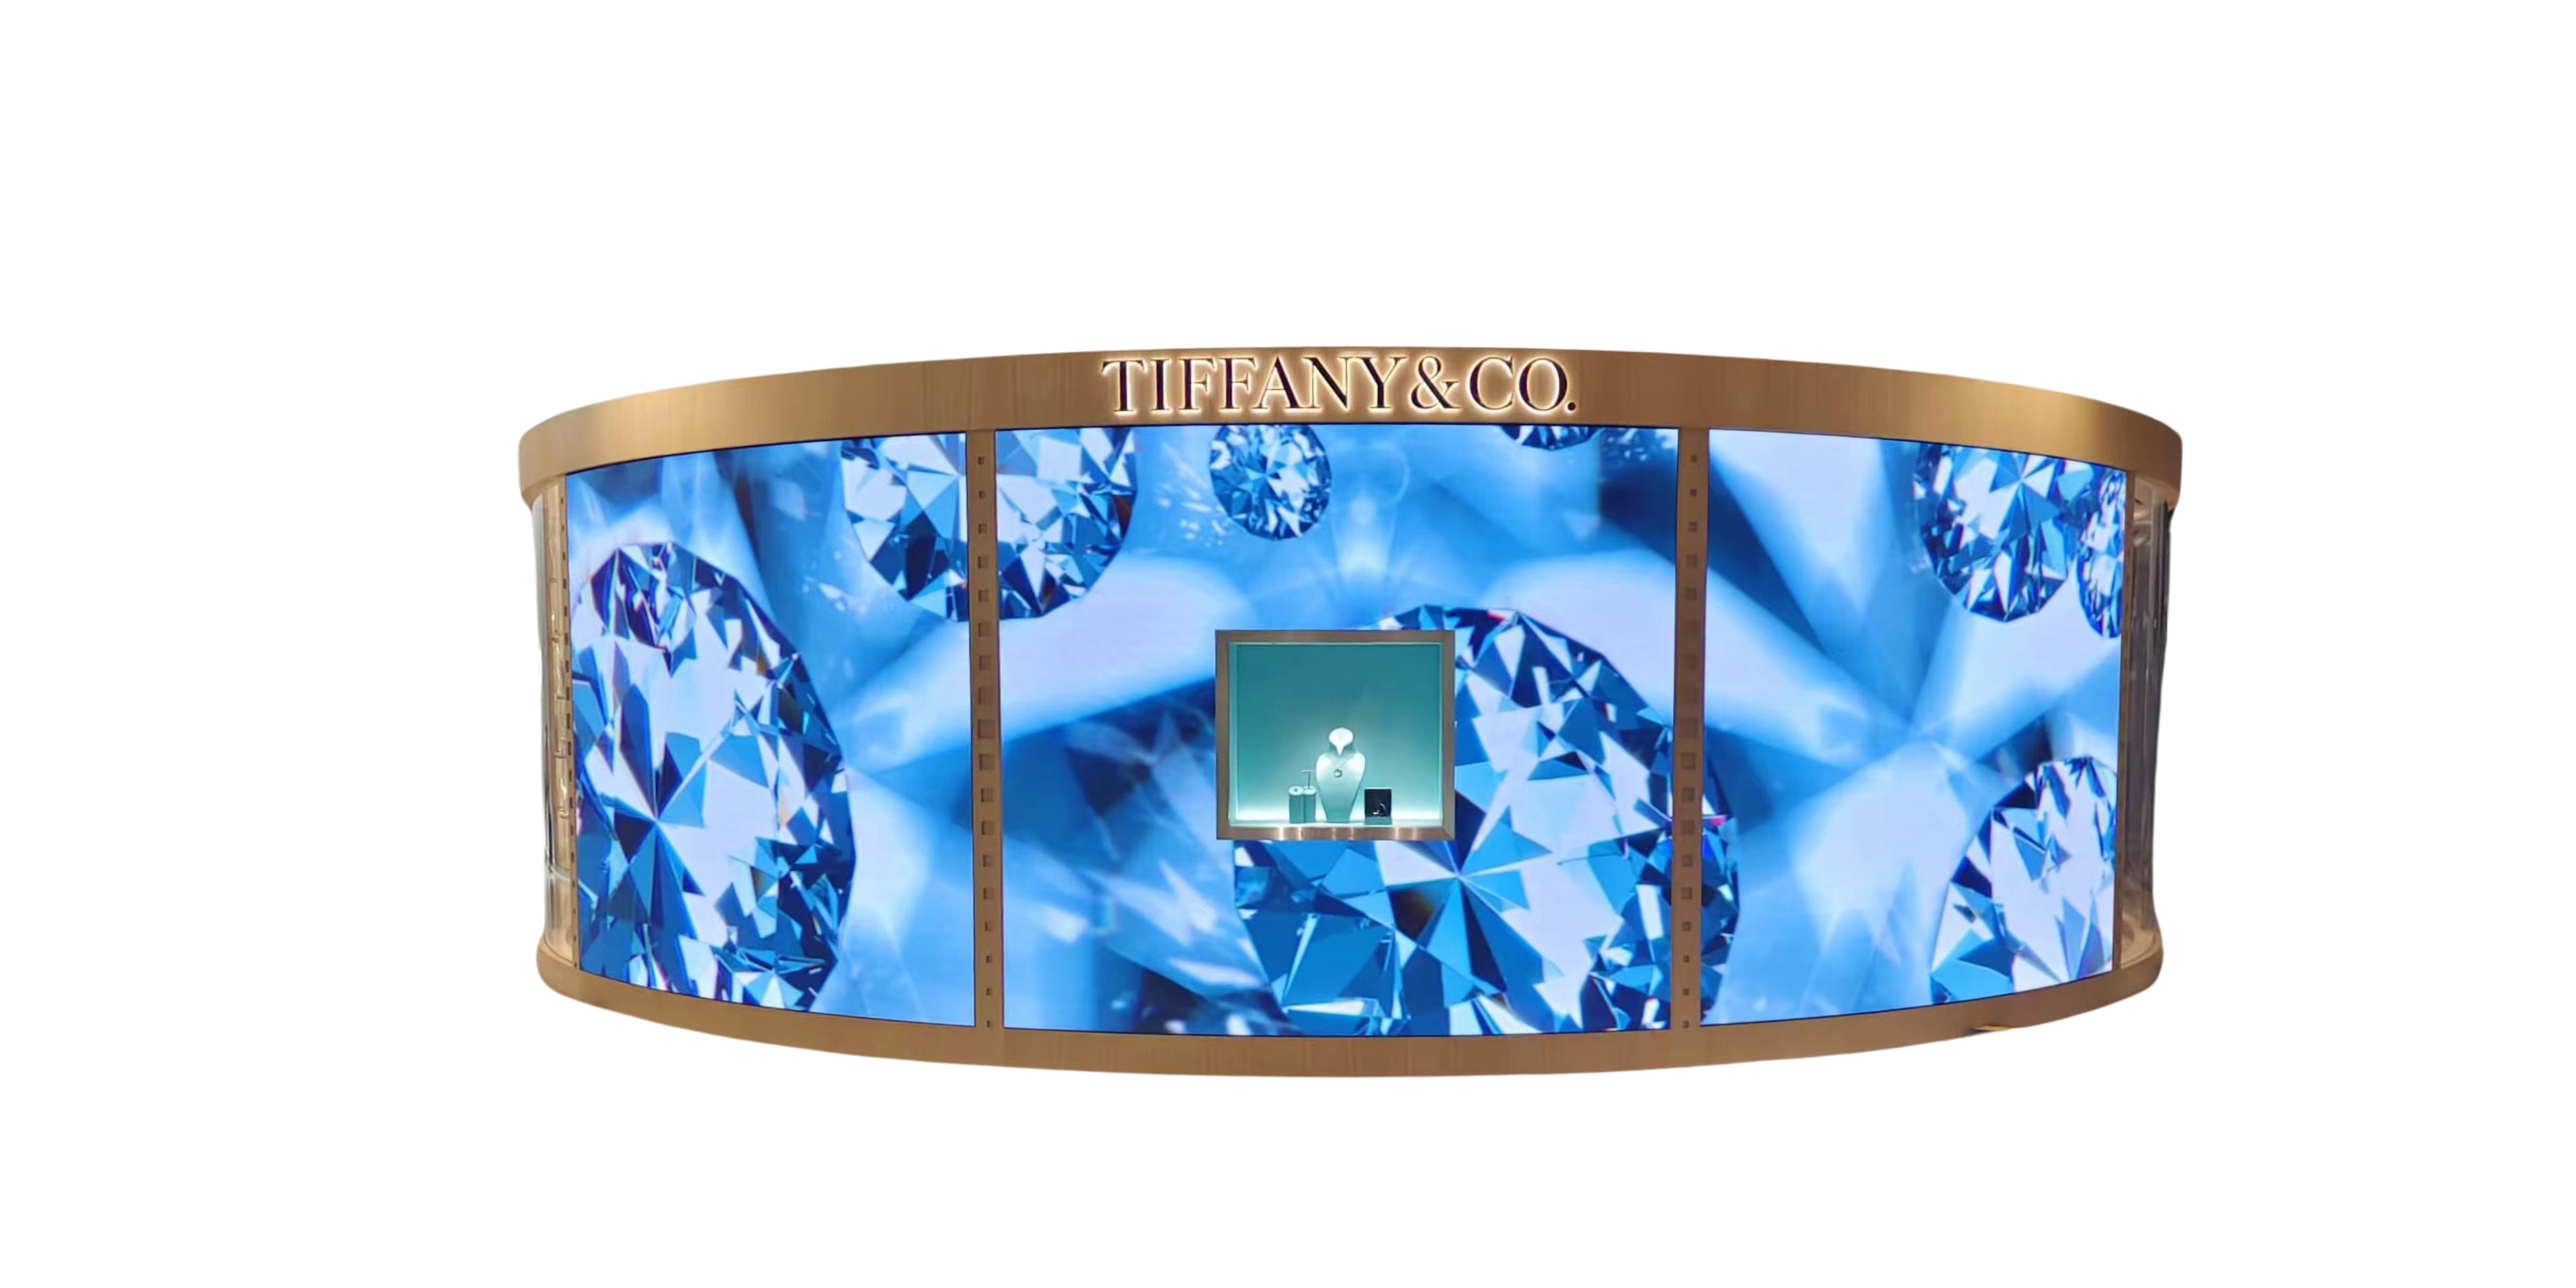 Tiffany and Co Thailand LED Display Audax Visuals